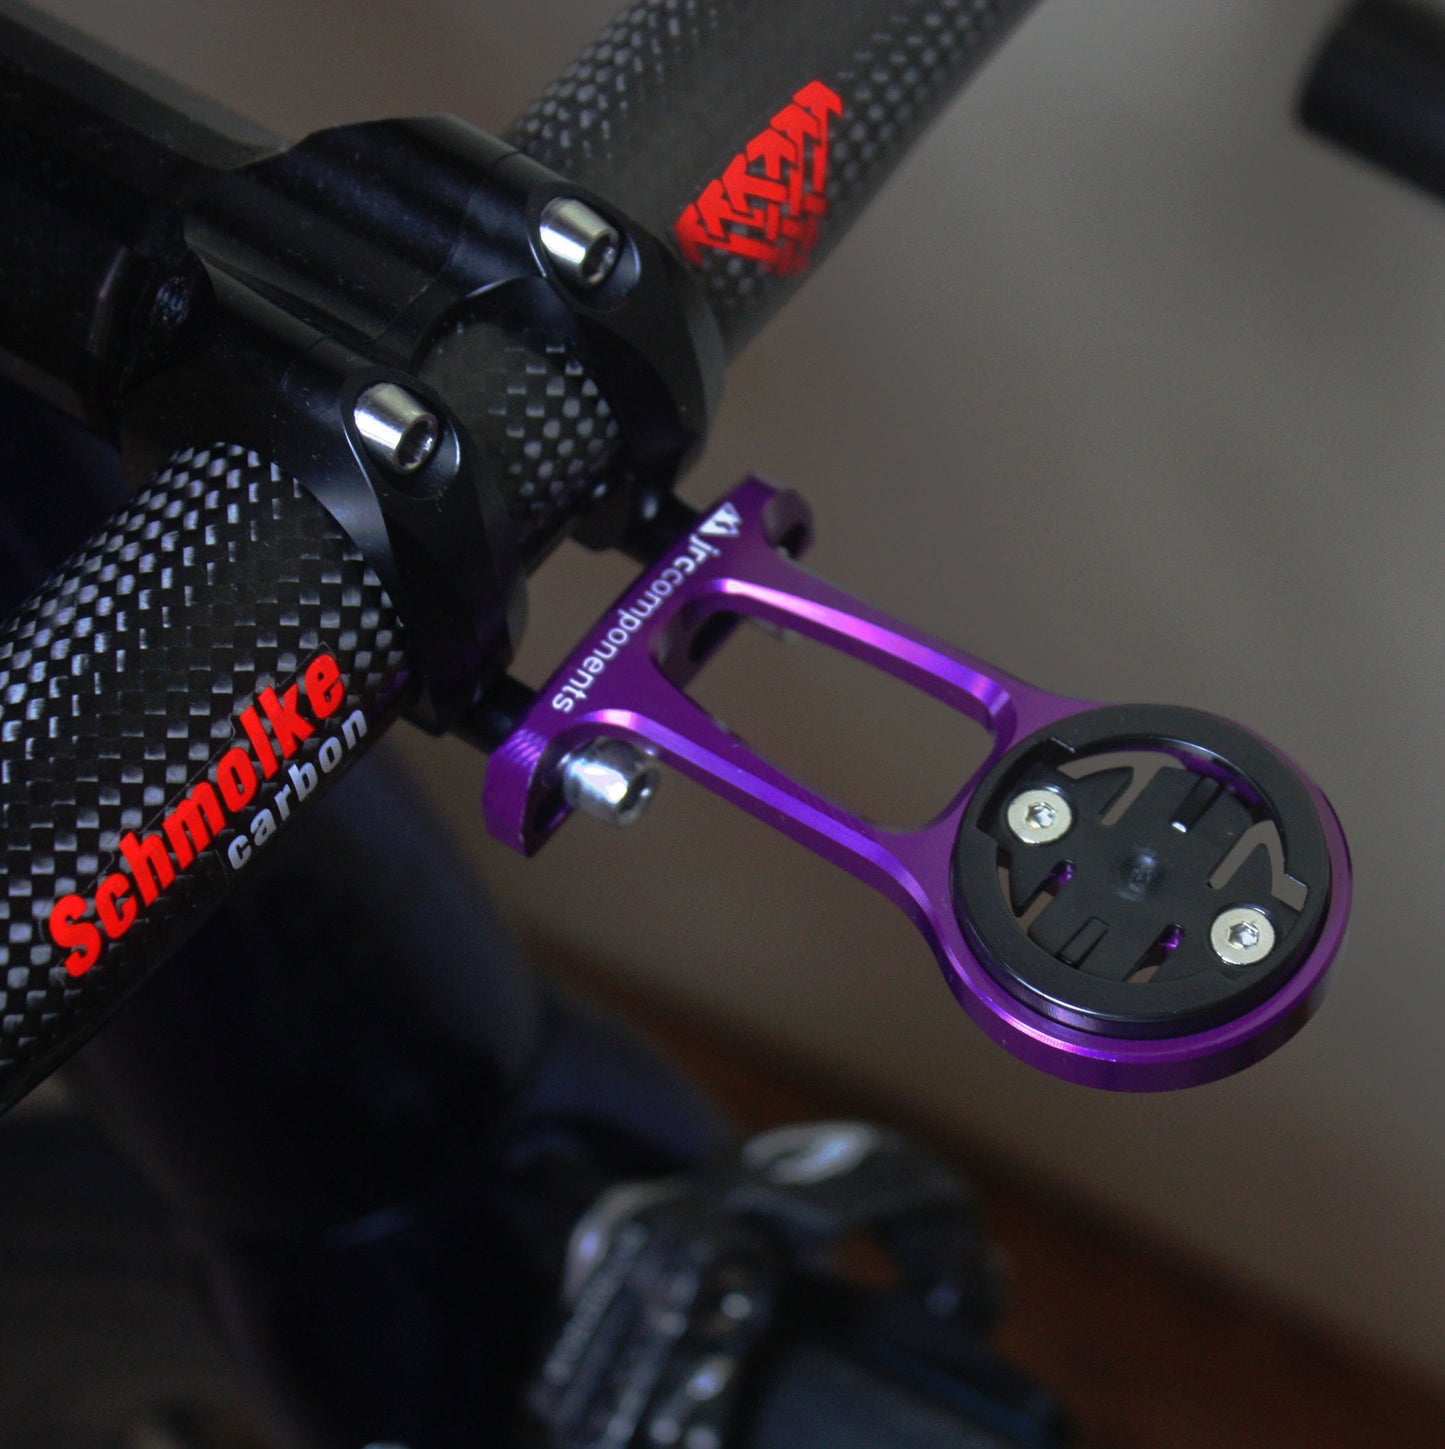 Purple, lightweight aluminium stem out front GPS computer mount, fitted to bicycle